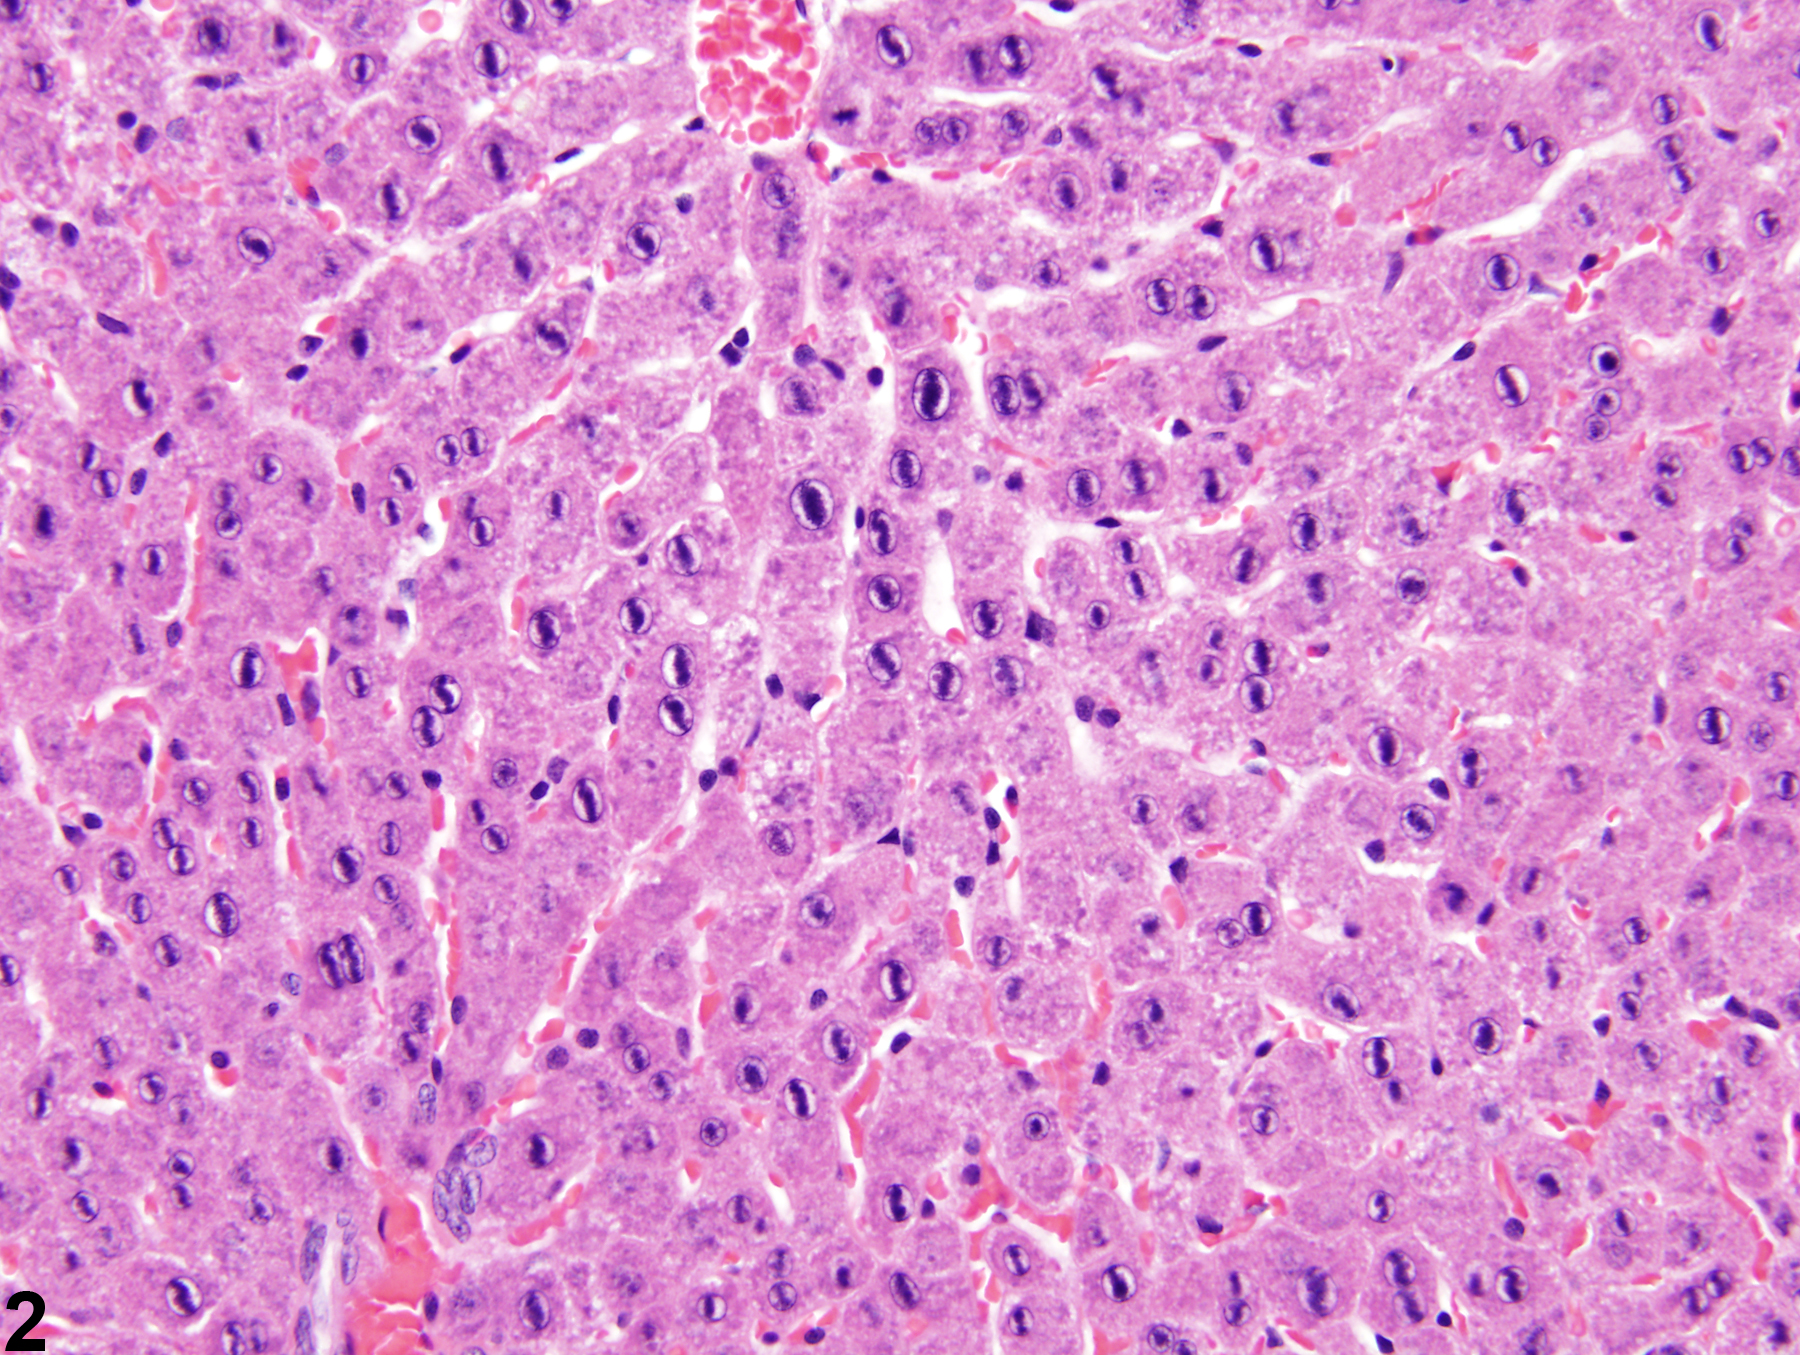 Image of hepatodiaphragmatic nodule in the liver from a female F344/N rat in a subchronic study